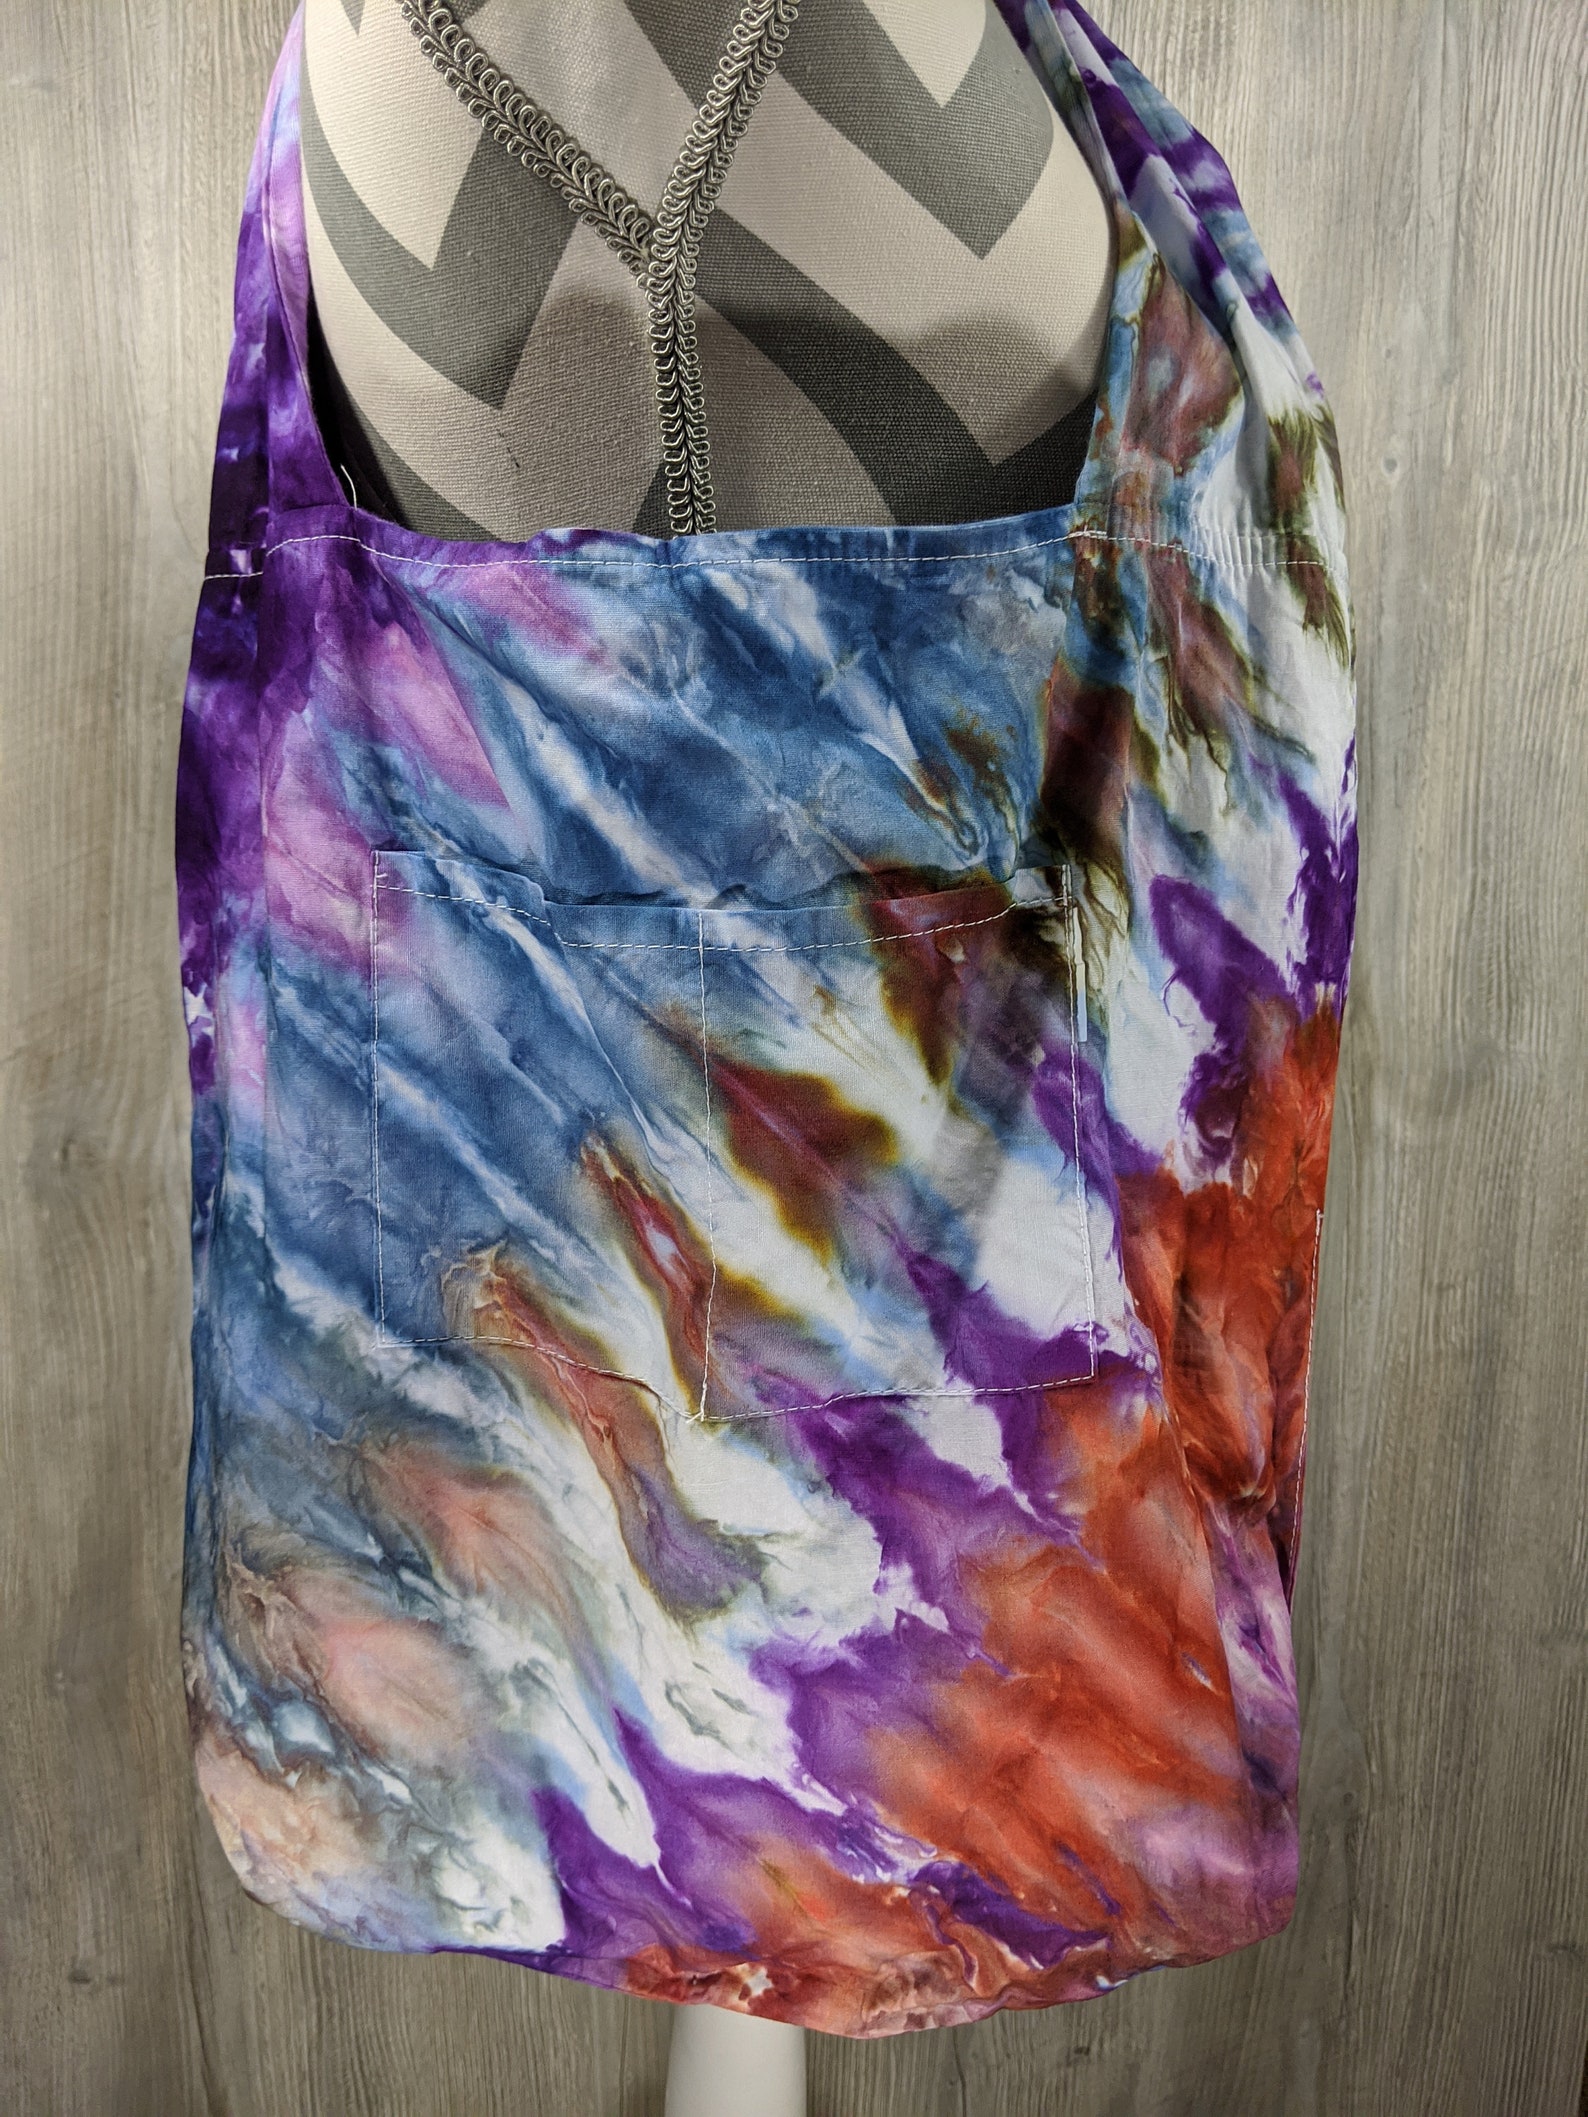 Hand Ice Dyed Tie Dye Hobo Bag/Purse with pocket 0418 | Etsy